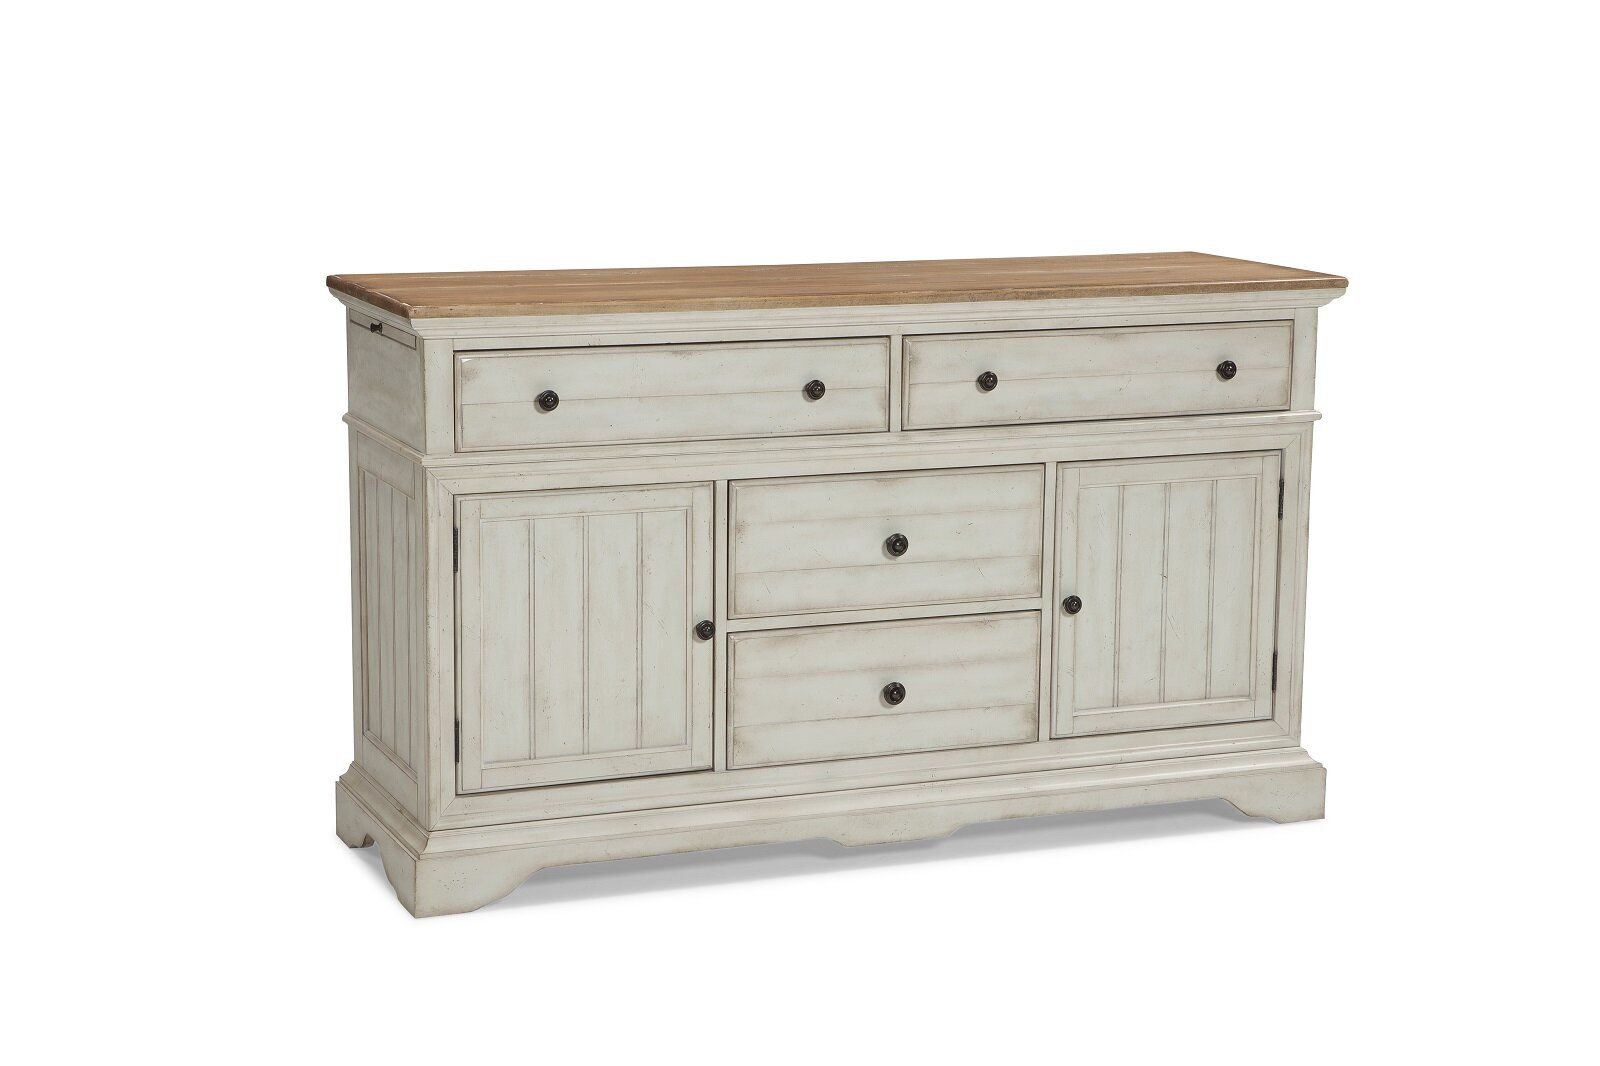 Farmhouse & Rustic Silverware Storage Equipped Sideboards Within Most Popular Payton Serving Sideboards (View 11 of 20)